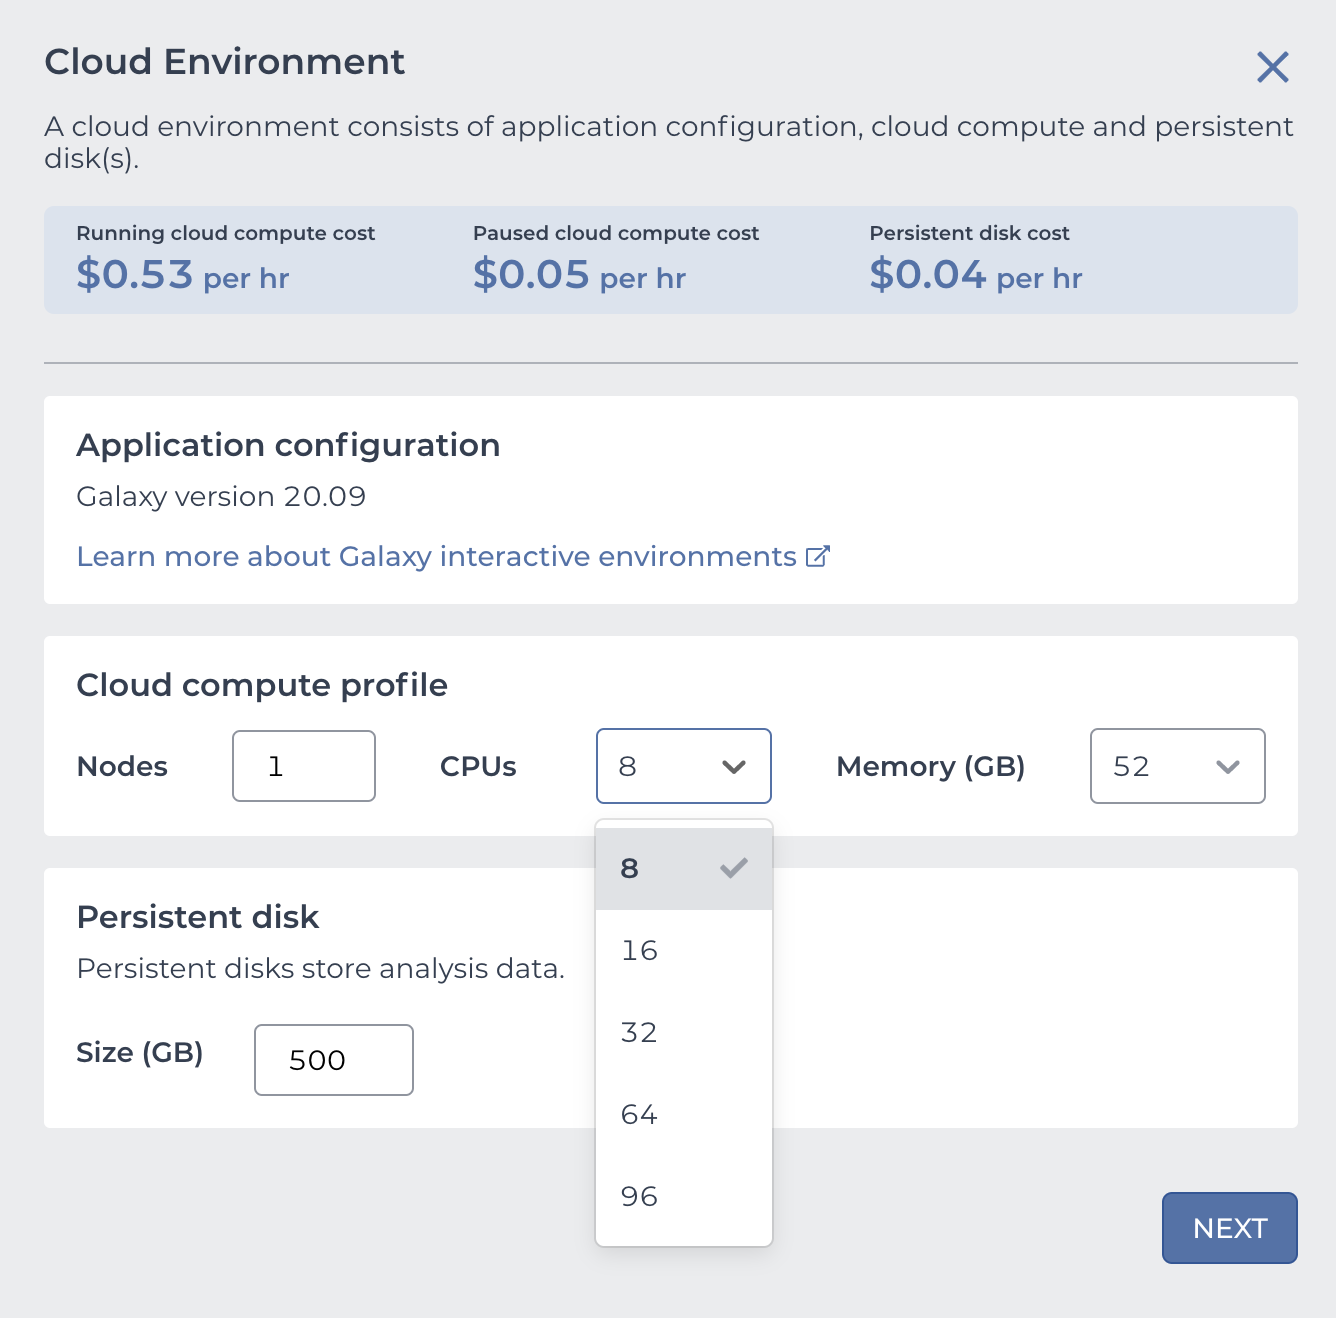 Screenshot of the Cloud Environment configuration pane with  a blue section at the top showing the running cloud compute cost - $0.53 per hour - paused cloud compute cost - $0.05 per hour - and persistent disk cost - $0.04 per hour. Below this is the Application configuration with Galaxy version 21.9 installed. Below this is the default cloud compute profile of one node, a dropdown with options of 8, 16, 32, 64, and 96 for the CPUs, and 52 GB of memory. Below this is the persistent disk of 500 GB